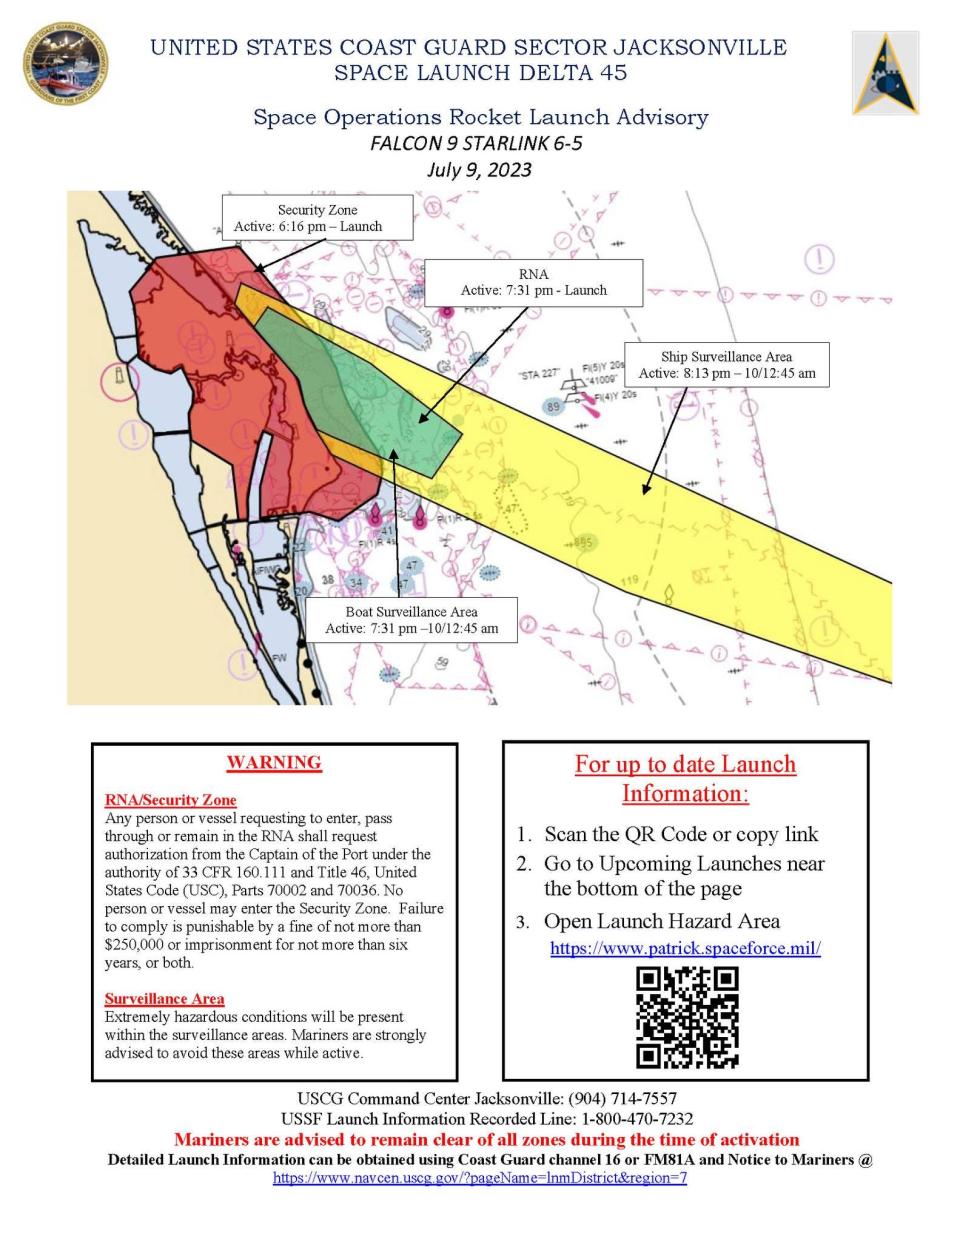 This is a U.S. Coast Guard/Space Launch Delta 45 launch exclusion zone map that Port Canaveral posted on its Facebook page in advance of a July 9 SpaceX Falcon 9 launch.